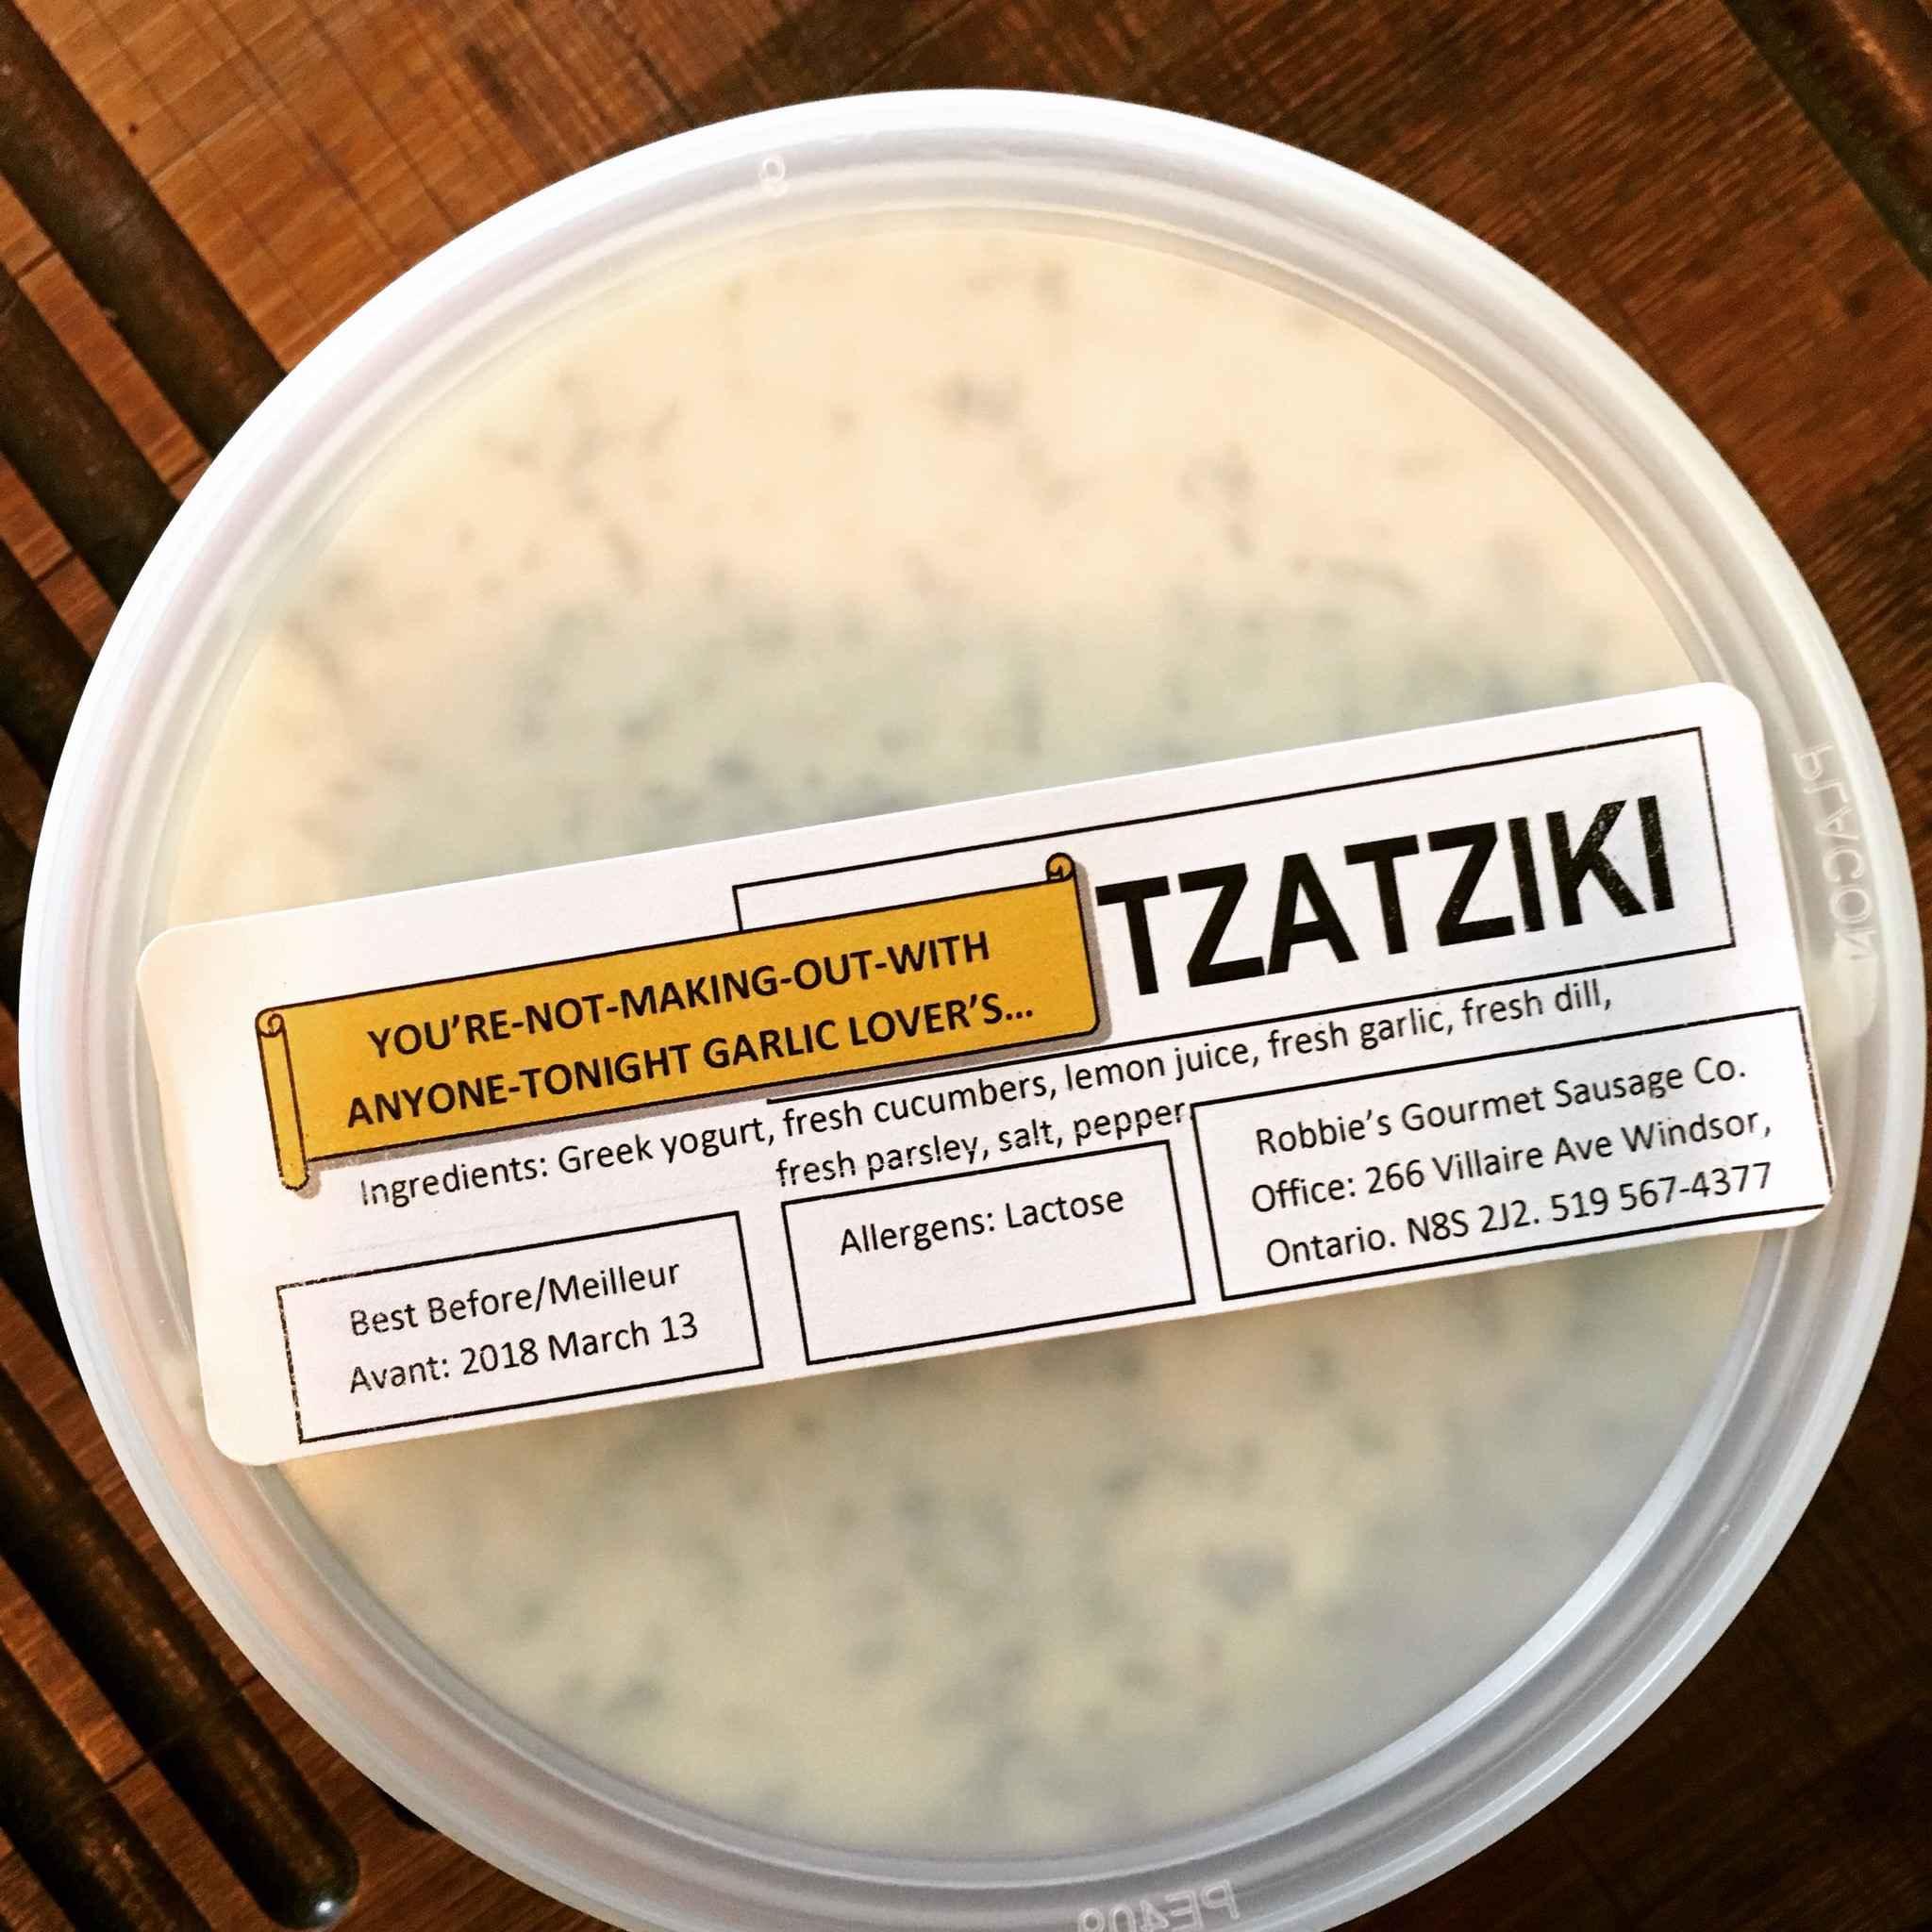 Fresh tzatziki made in house at Robbie's Gourmet Sausage Company.